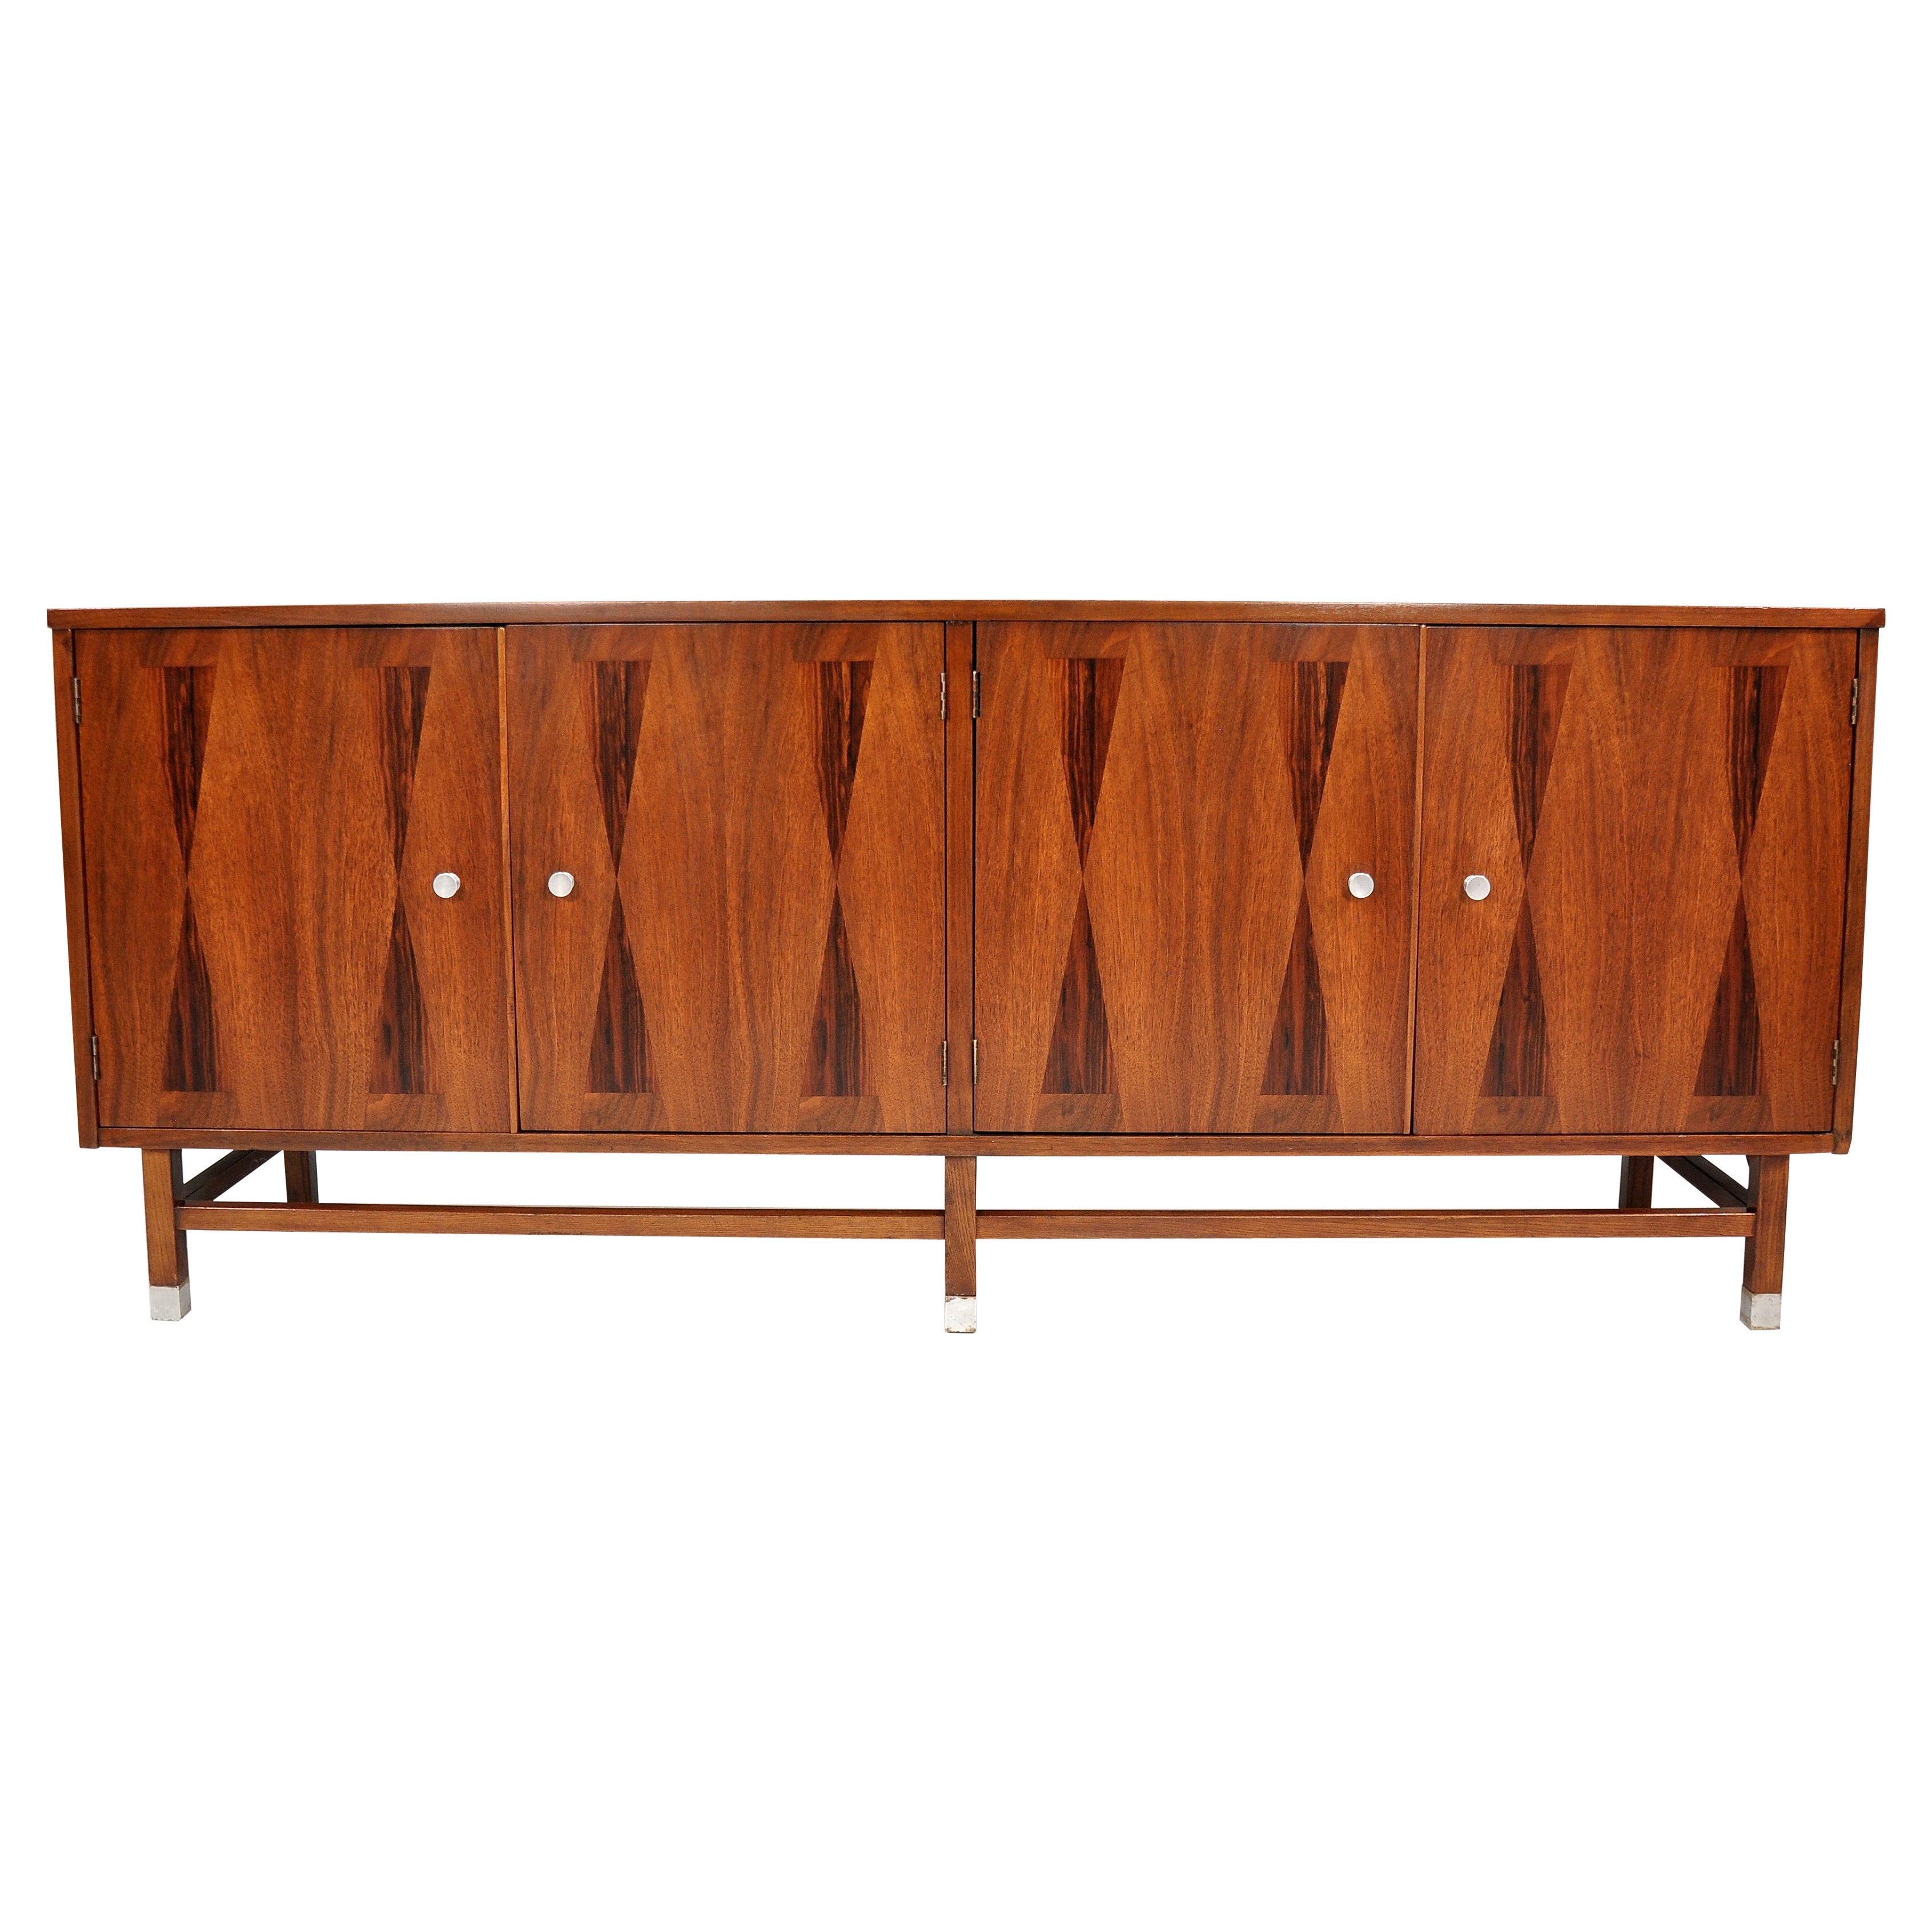 Stanley Walnut and Rosewood Credenza